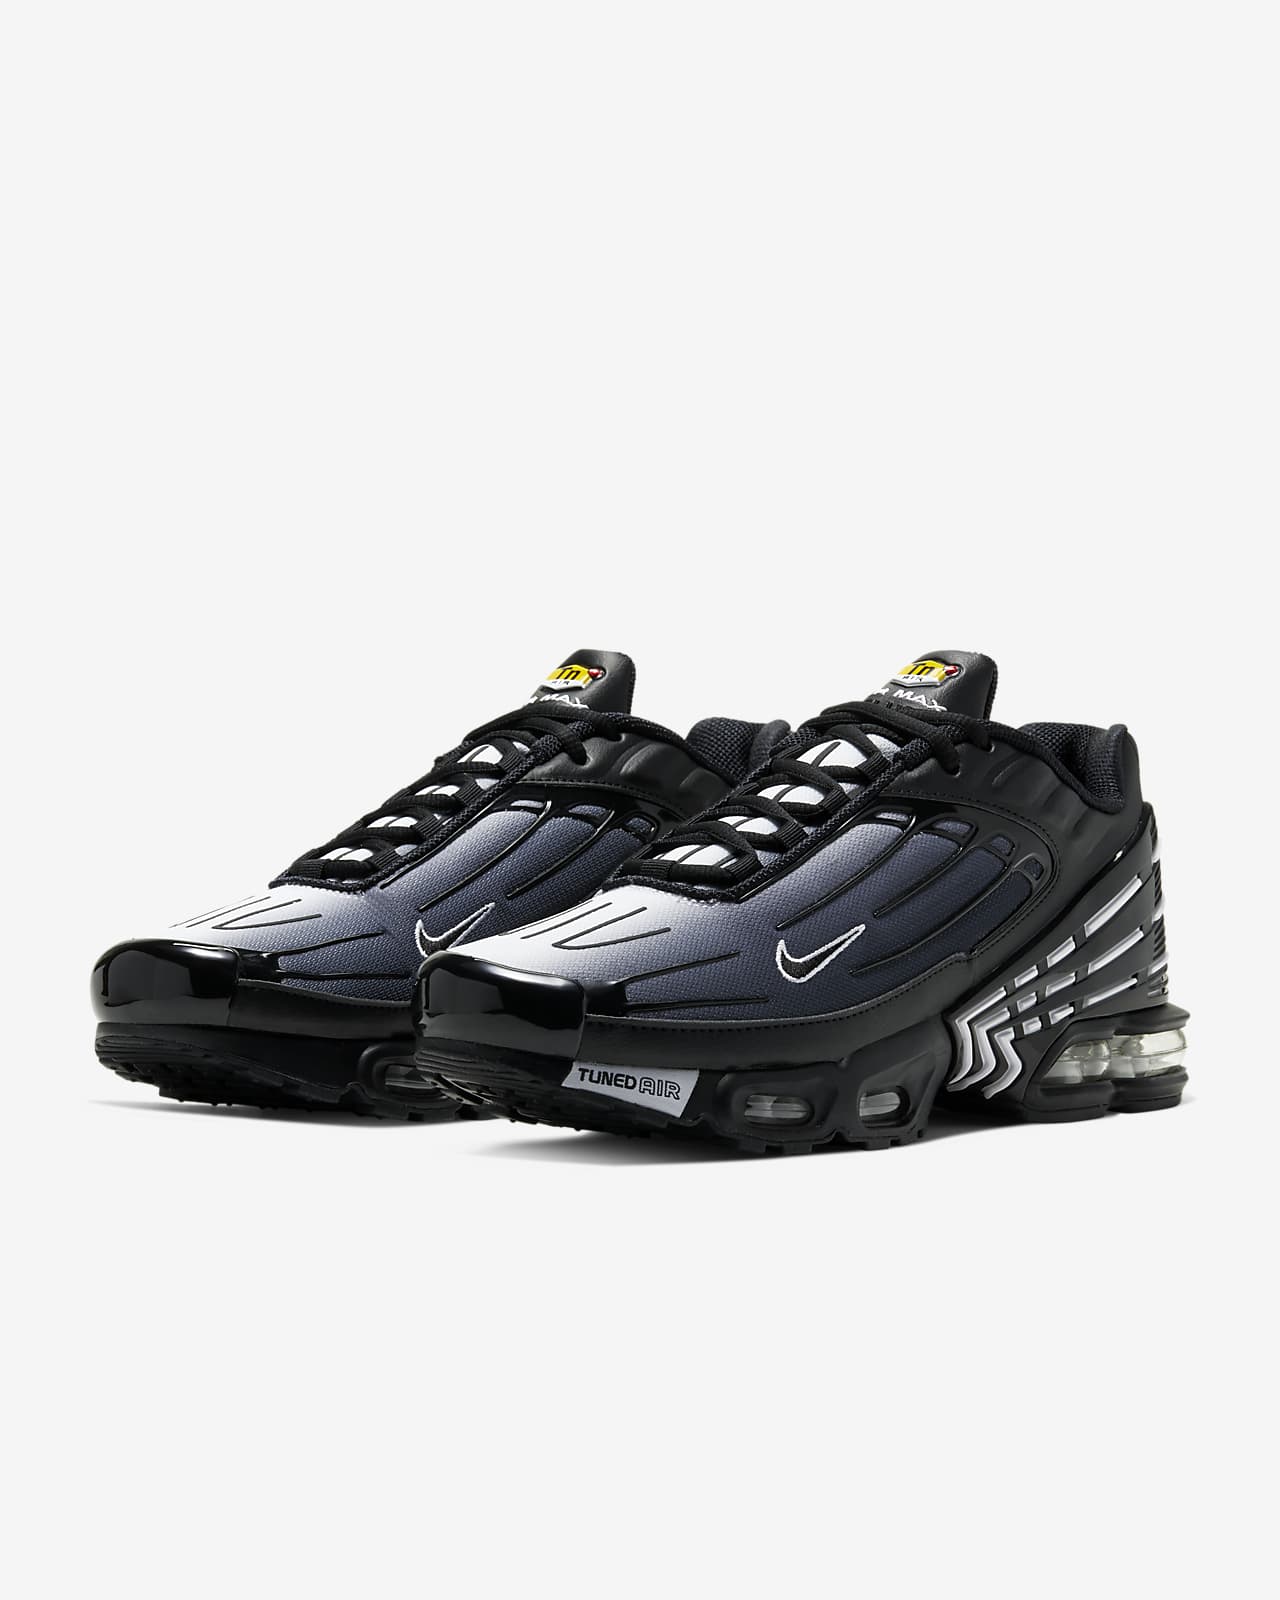 the newest nike air max